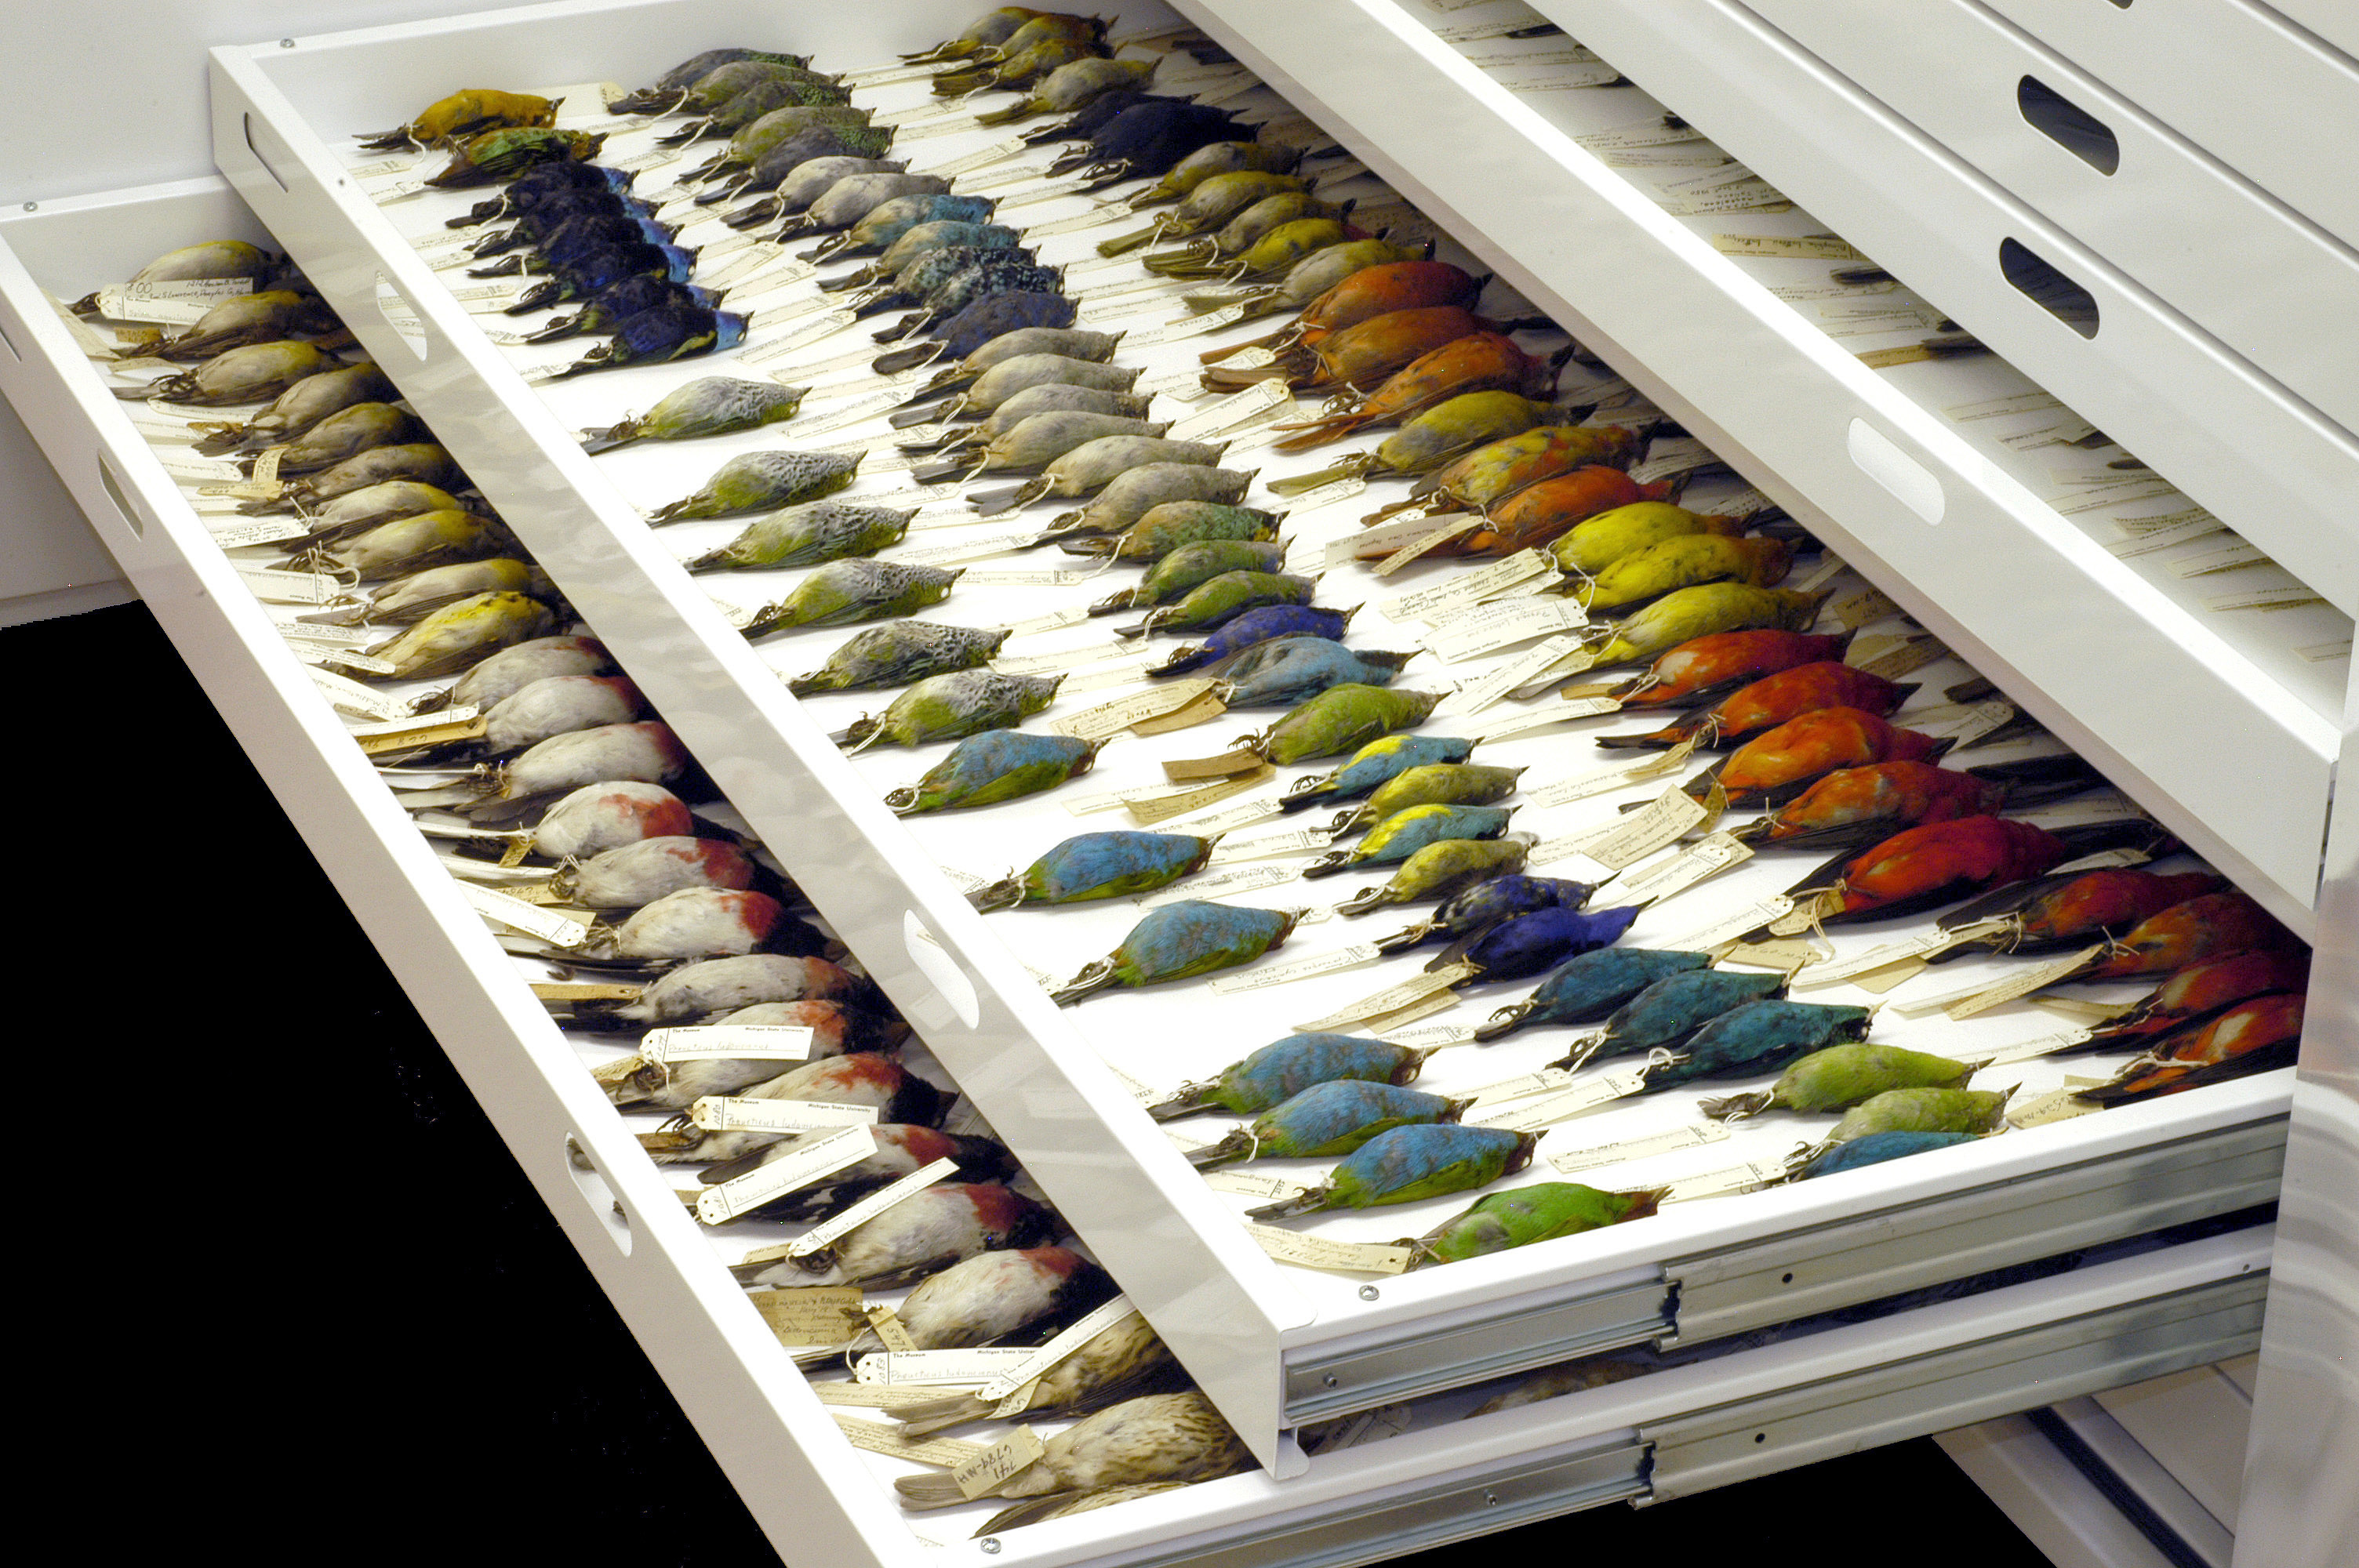 Preserved specimins of birds in the MSU Museum collections